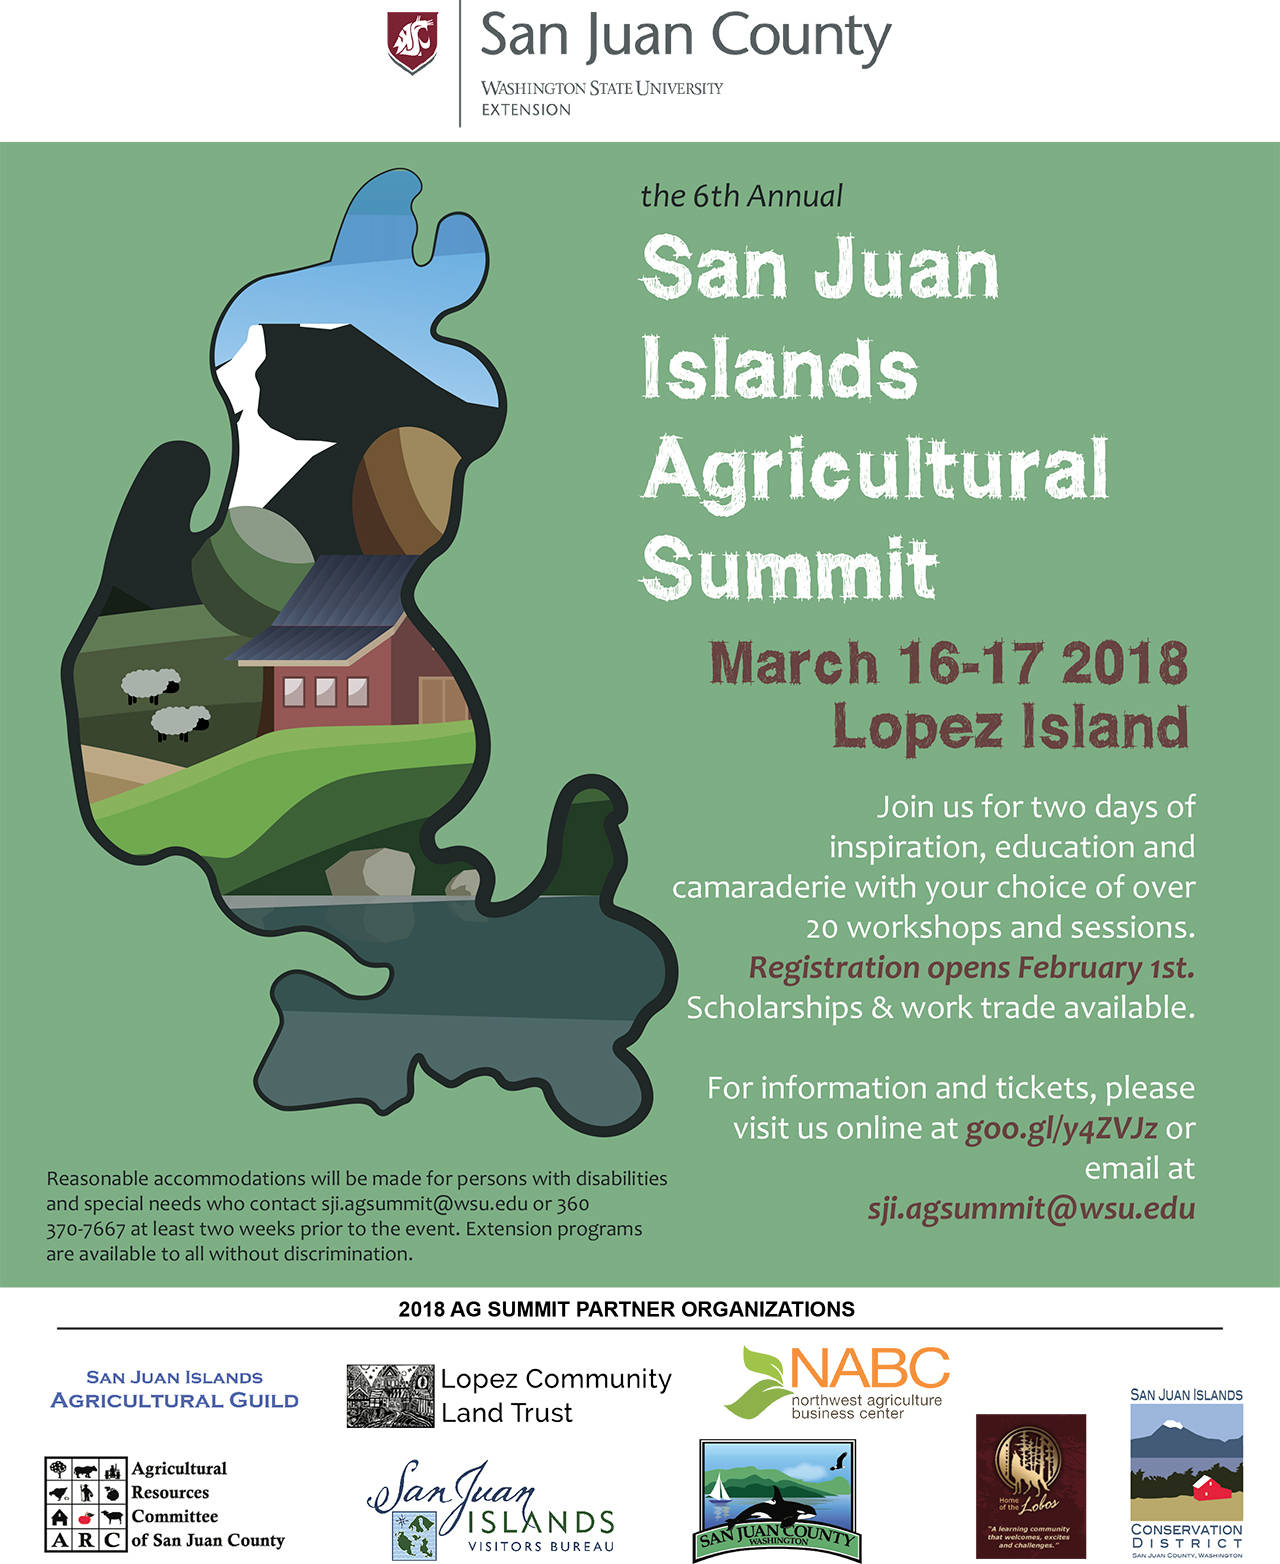 San Juan County’s Agricultural Summit returns in March